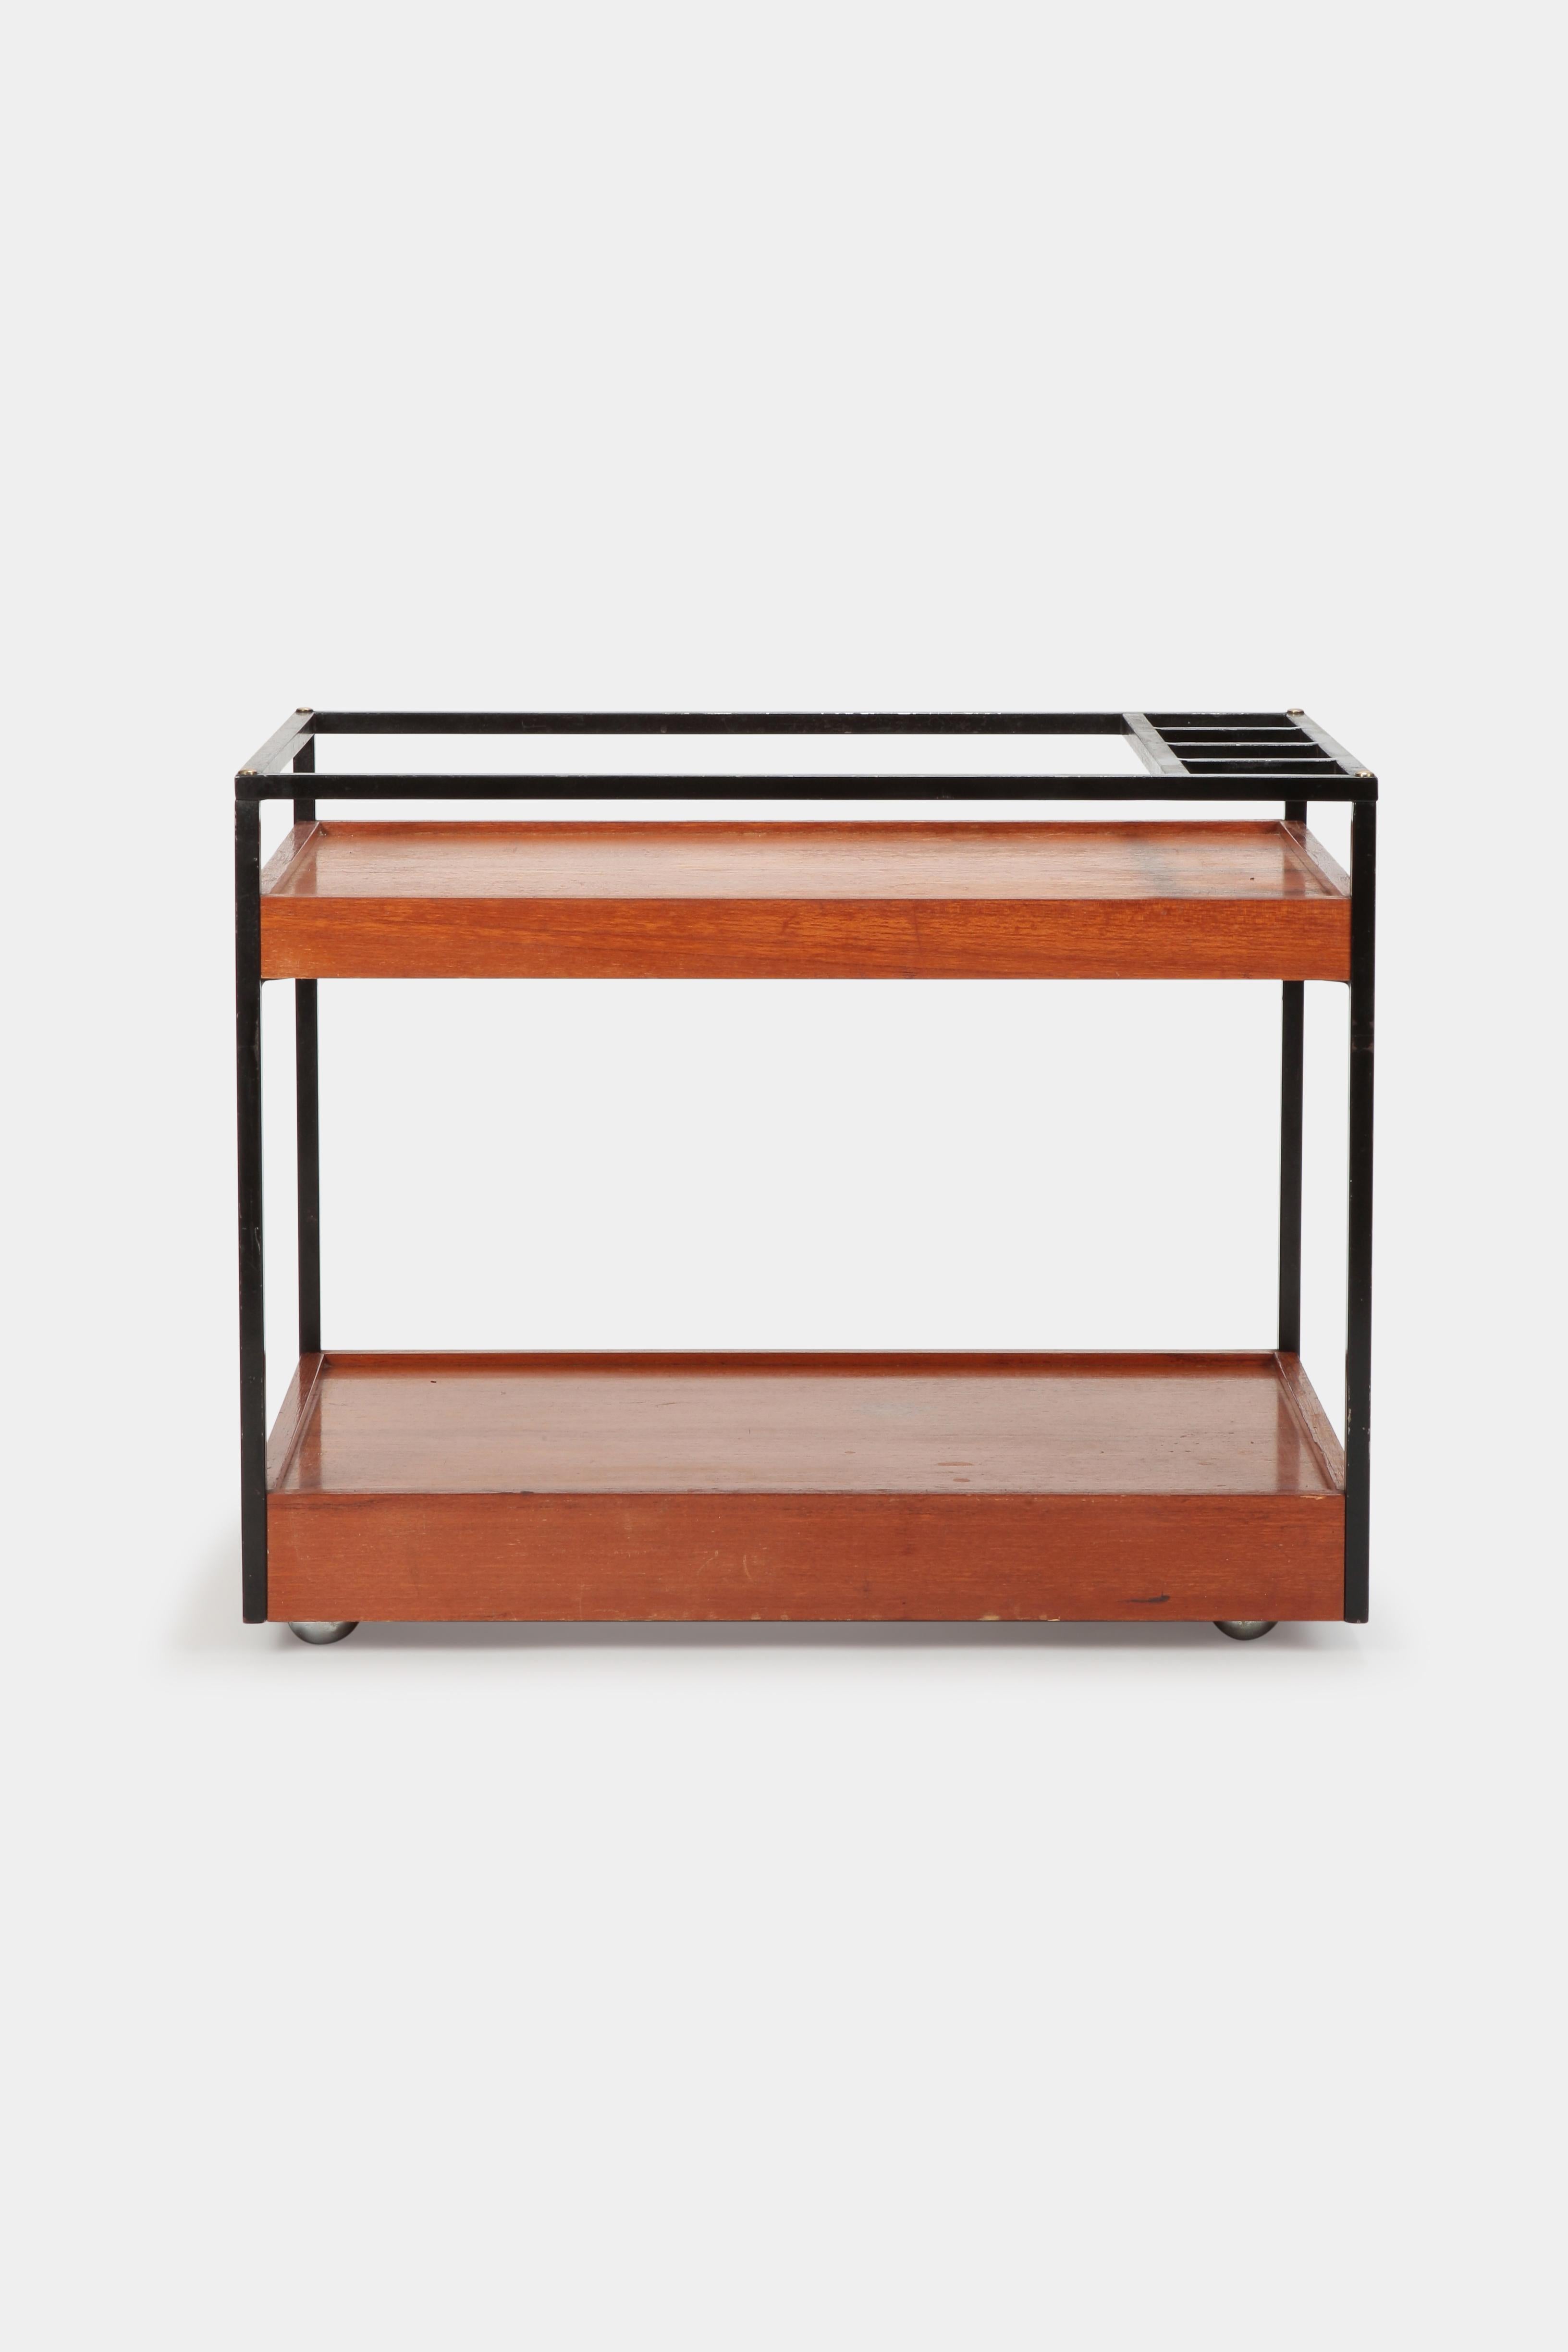 Dutch Attributed to Cees Braakman Bar Cart Pastoe, 1950s